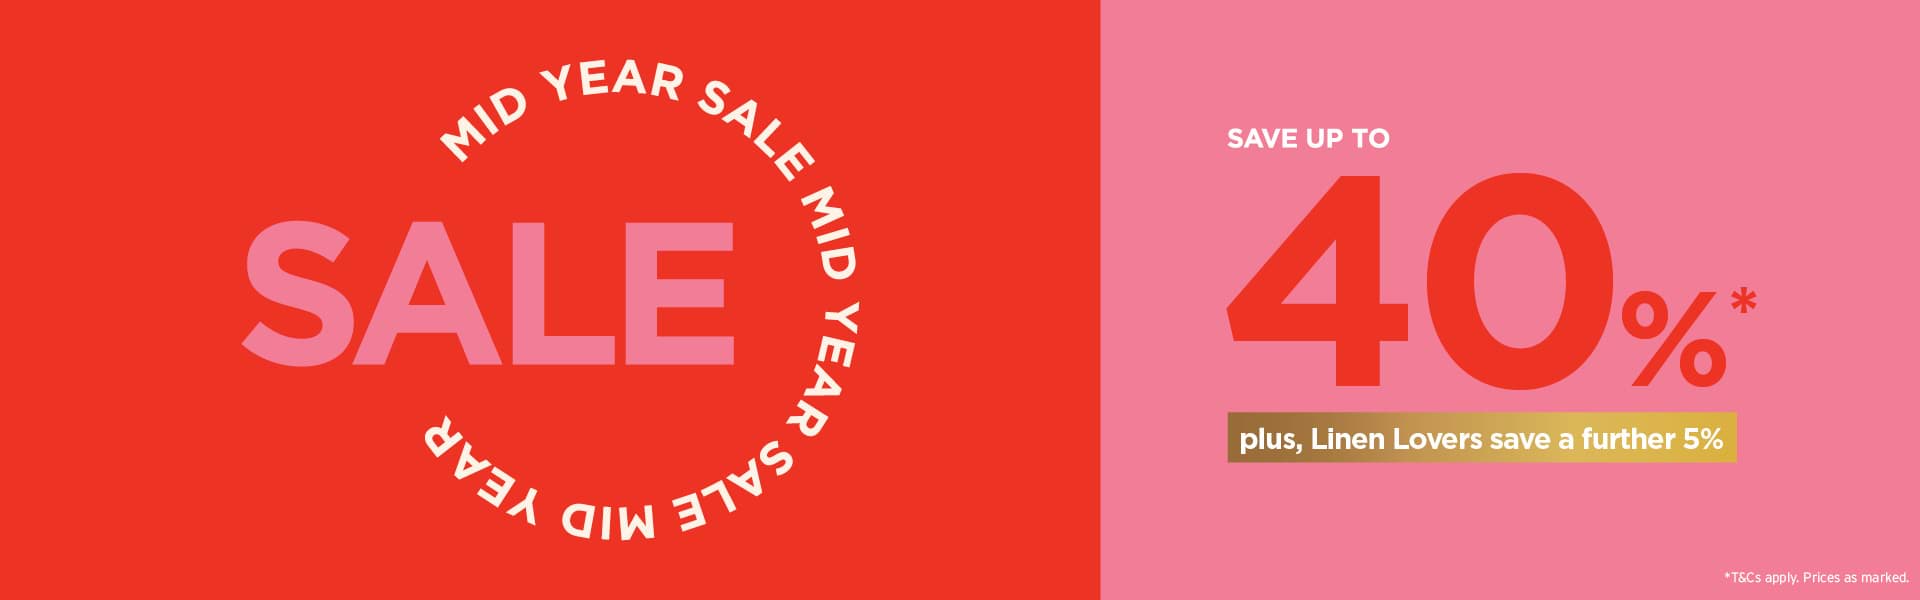 Adairs Mid Year sale up to 40% OFF + Linen Lovers save further 5%